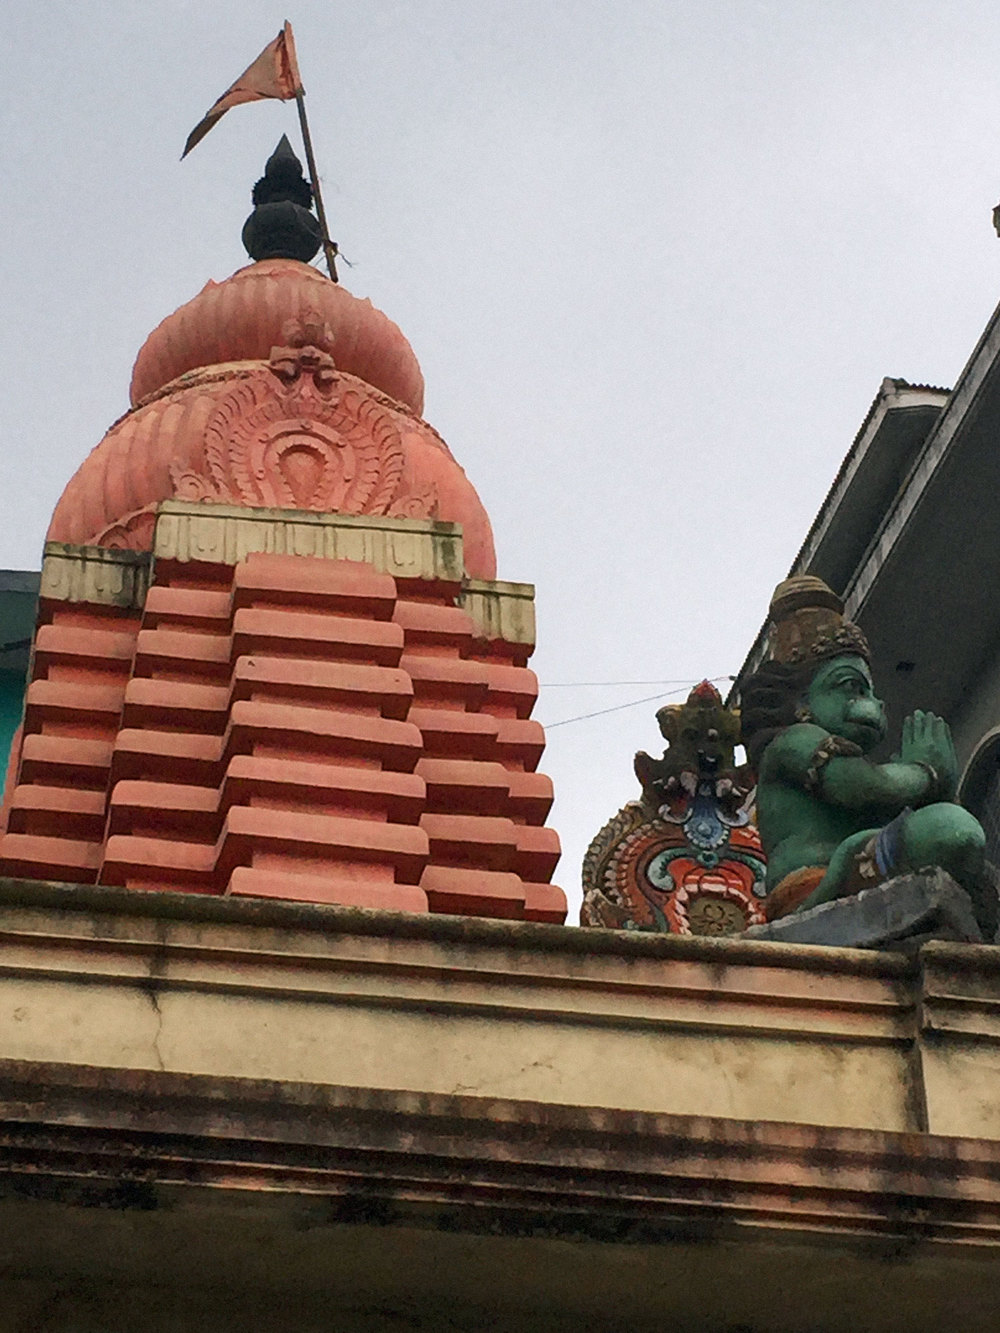 Another angle of the small Krishna temple. I like the 'Hulk' green Hanuman in the namaste pose on the corner.